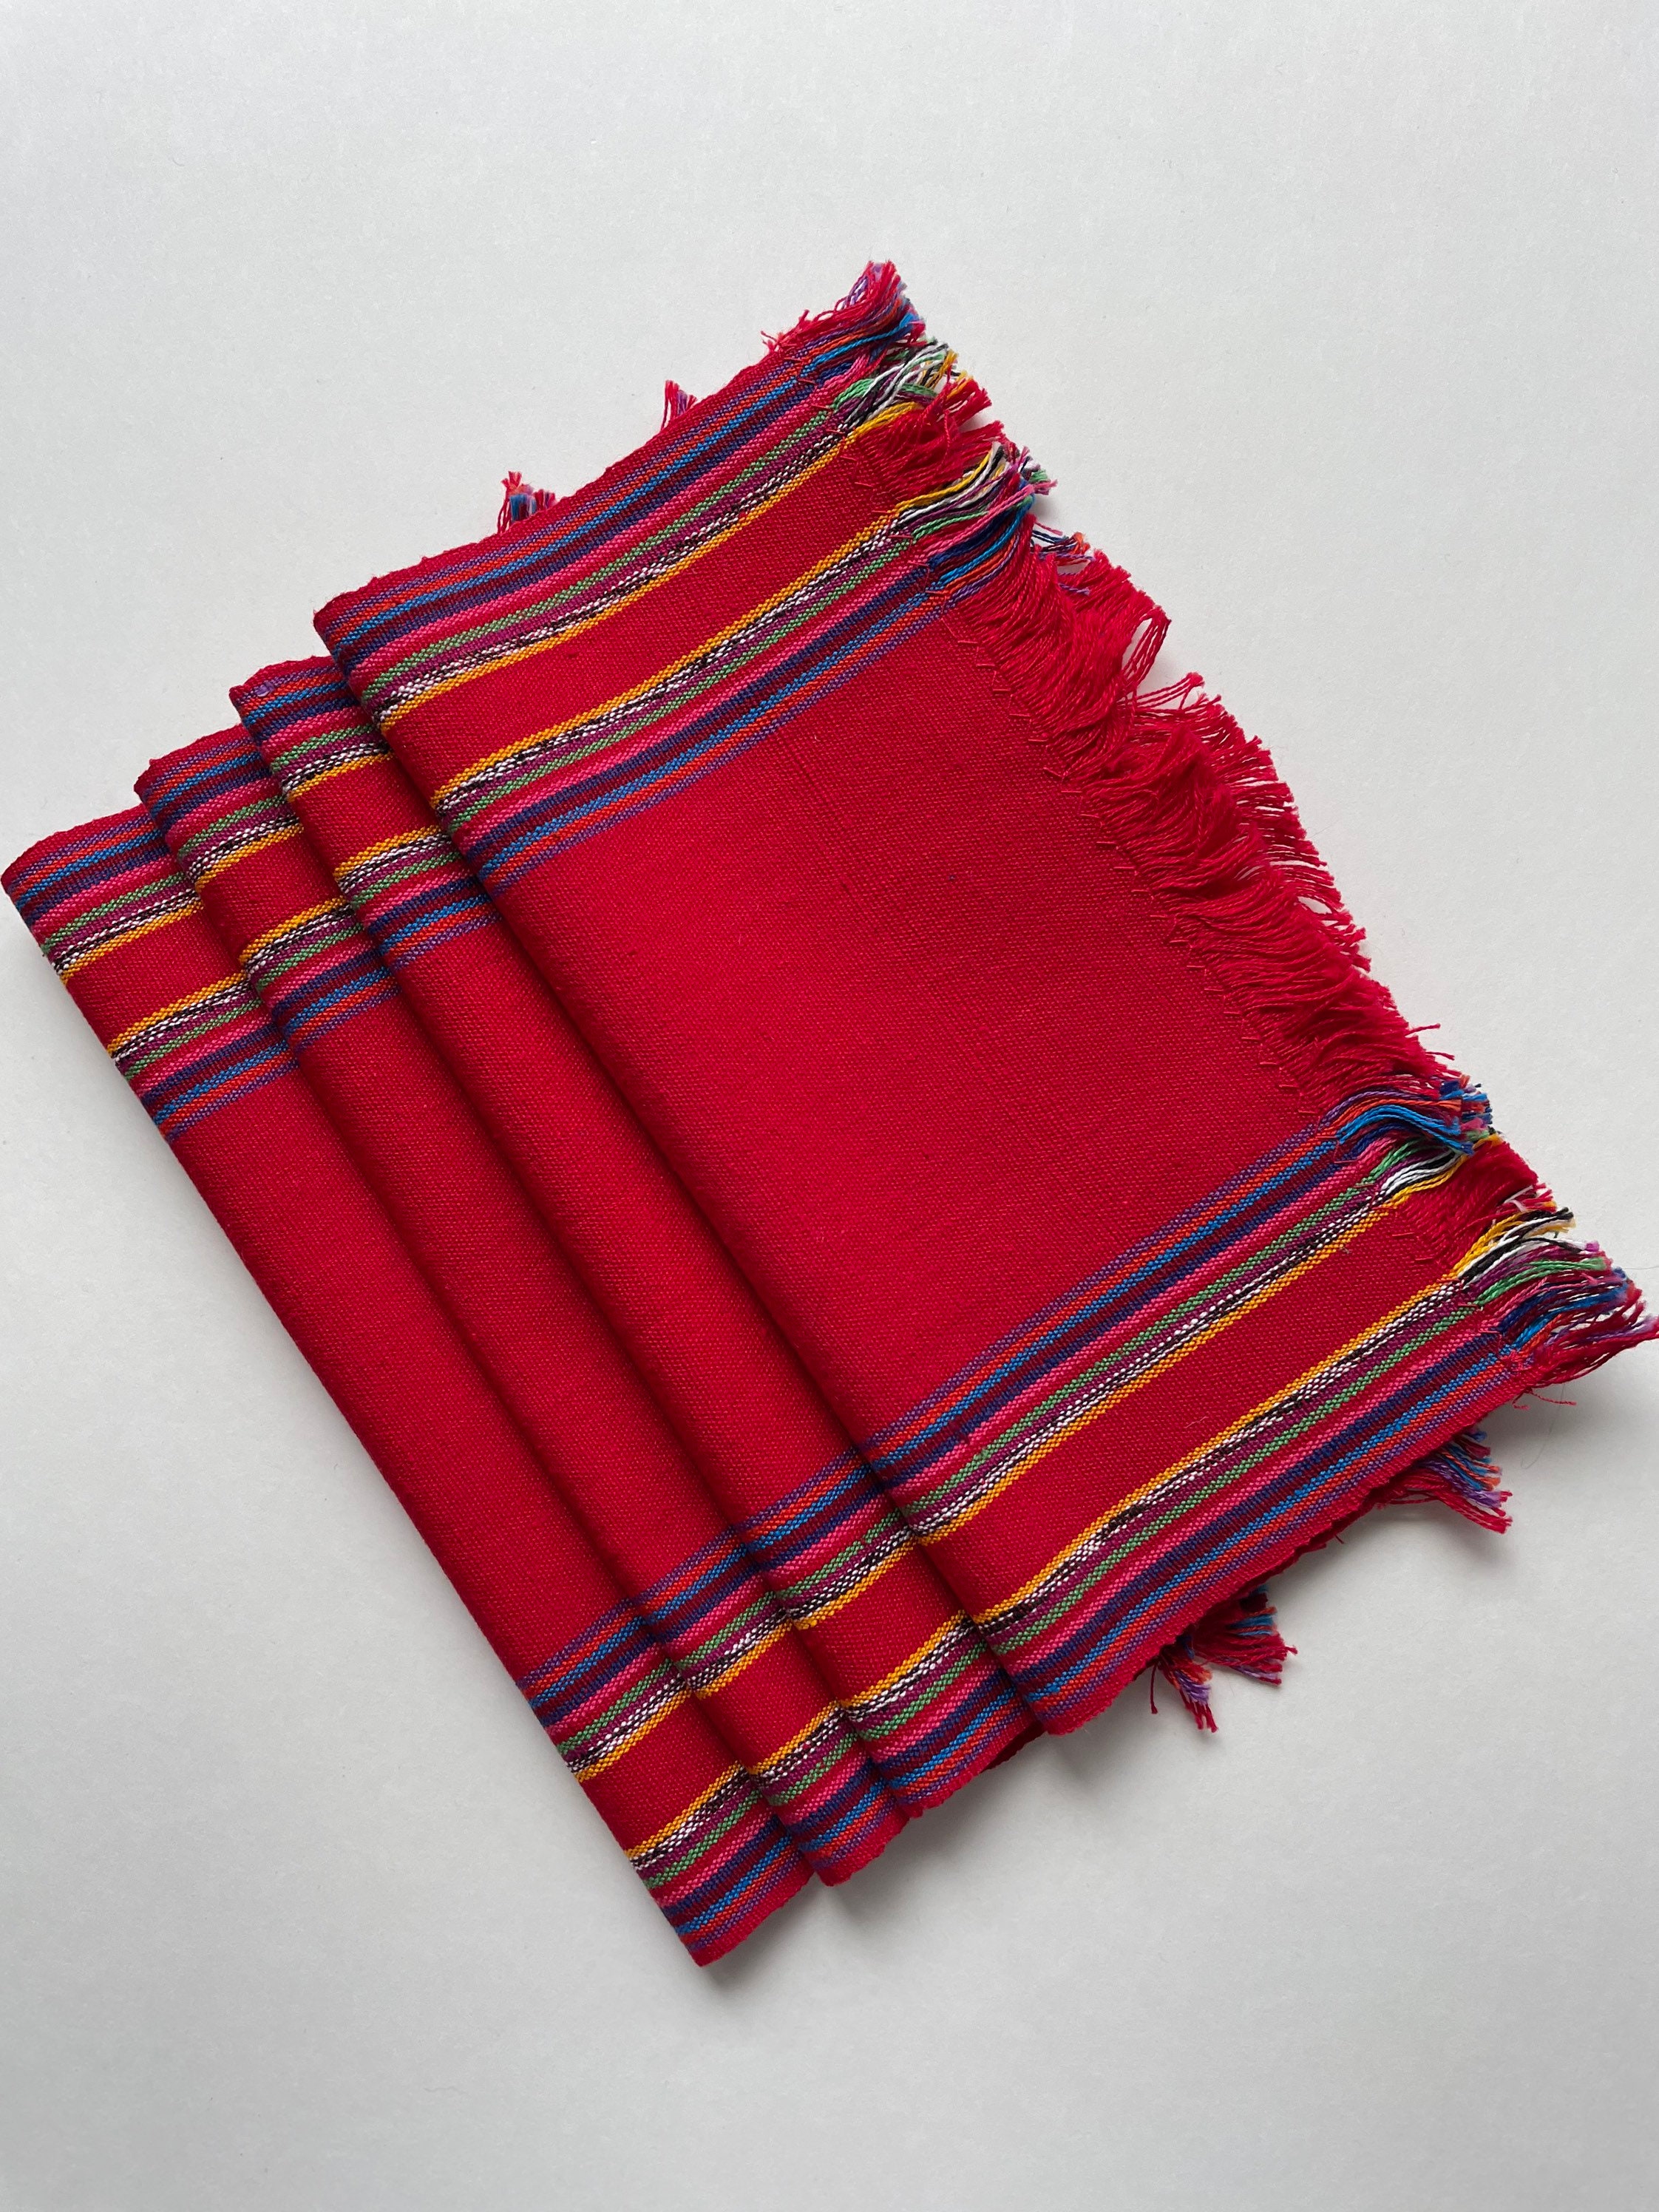 Excellent small red rainbow striped vintage woven Mexican Aztec Central America napkins set of 4